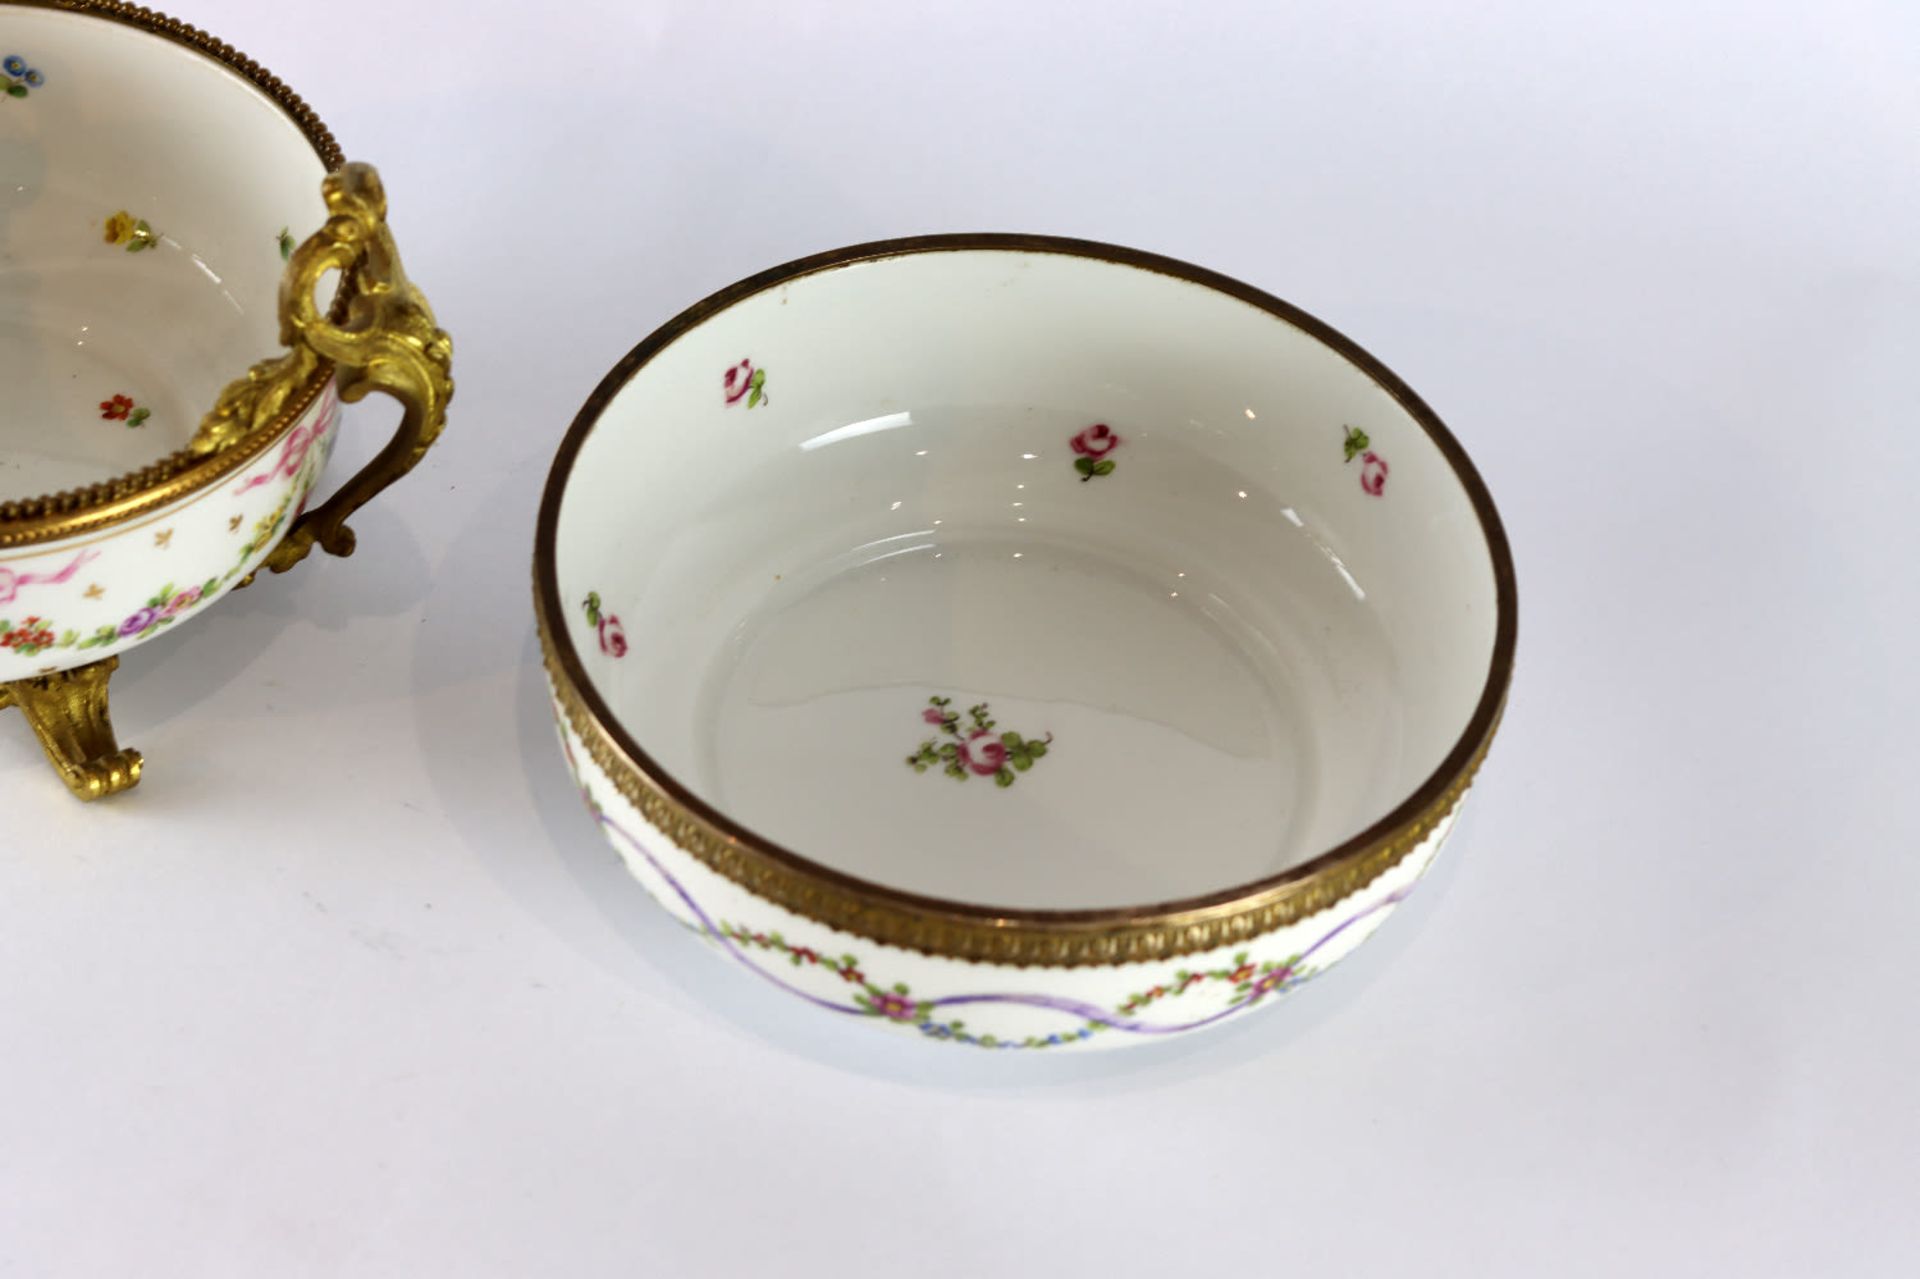 A pair of French ormolu-mounted porcelain comport, 19th Century - Image 7 of 11